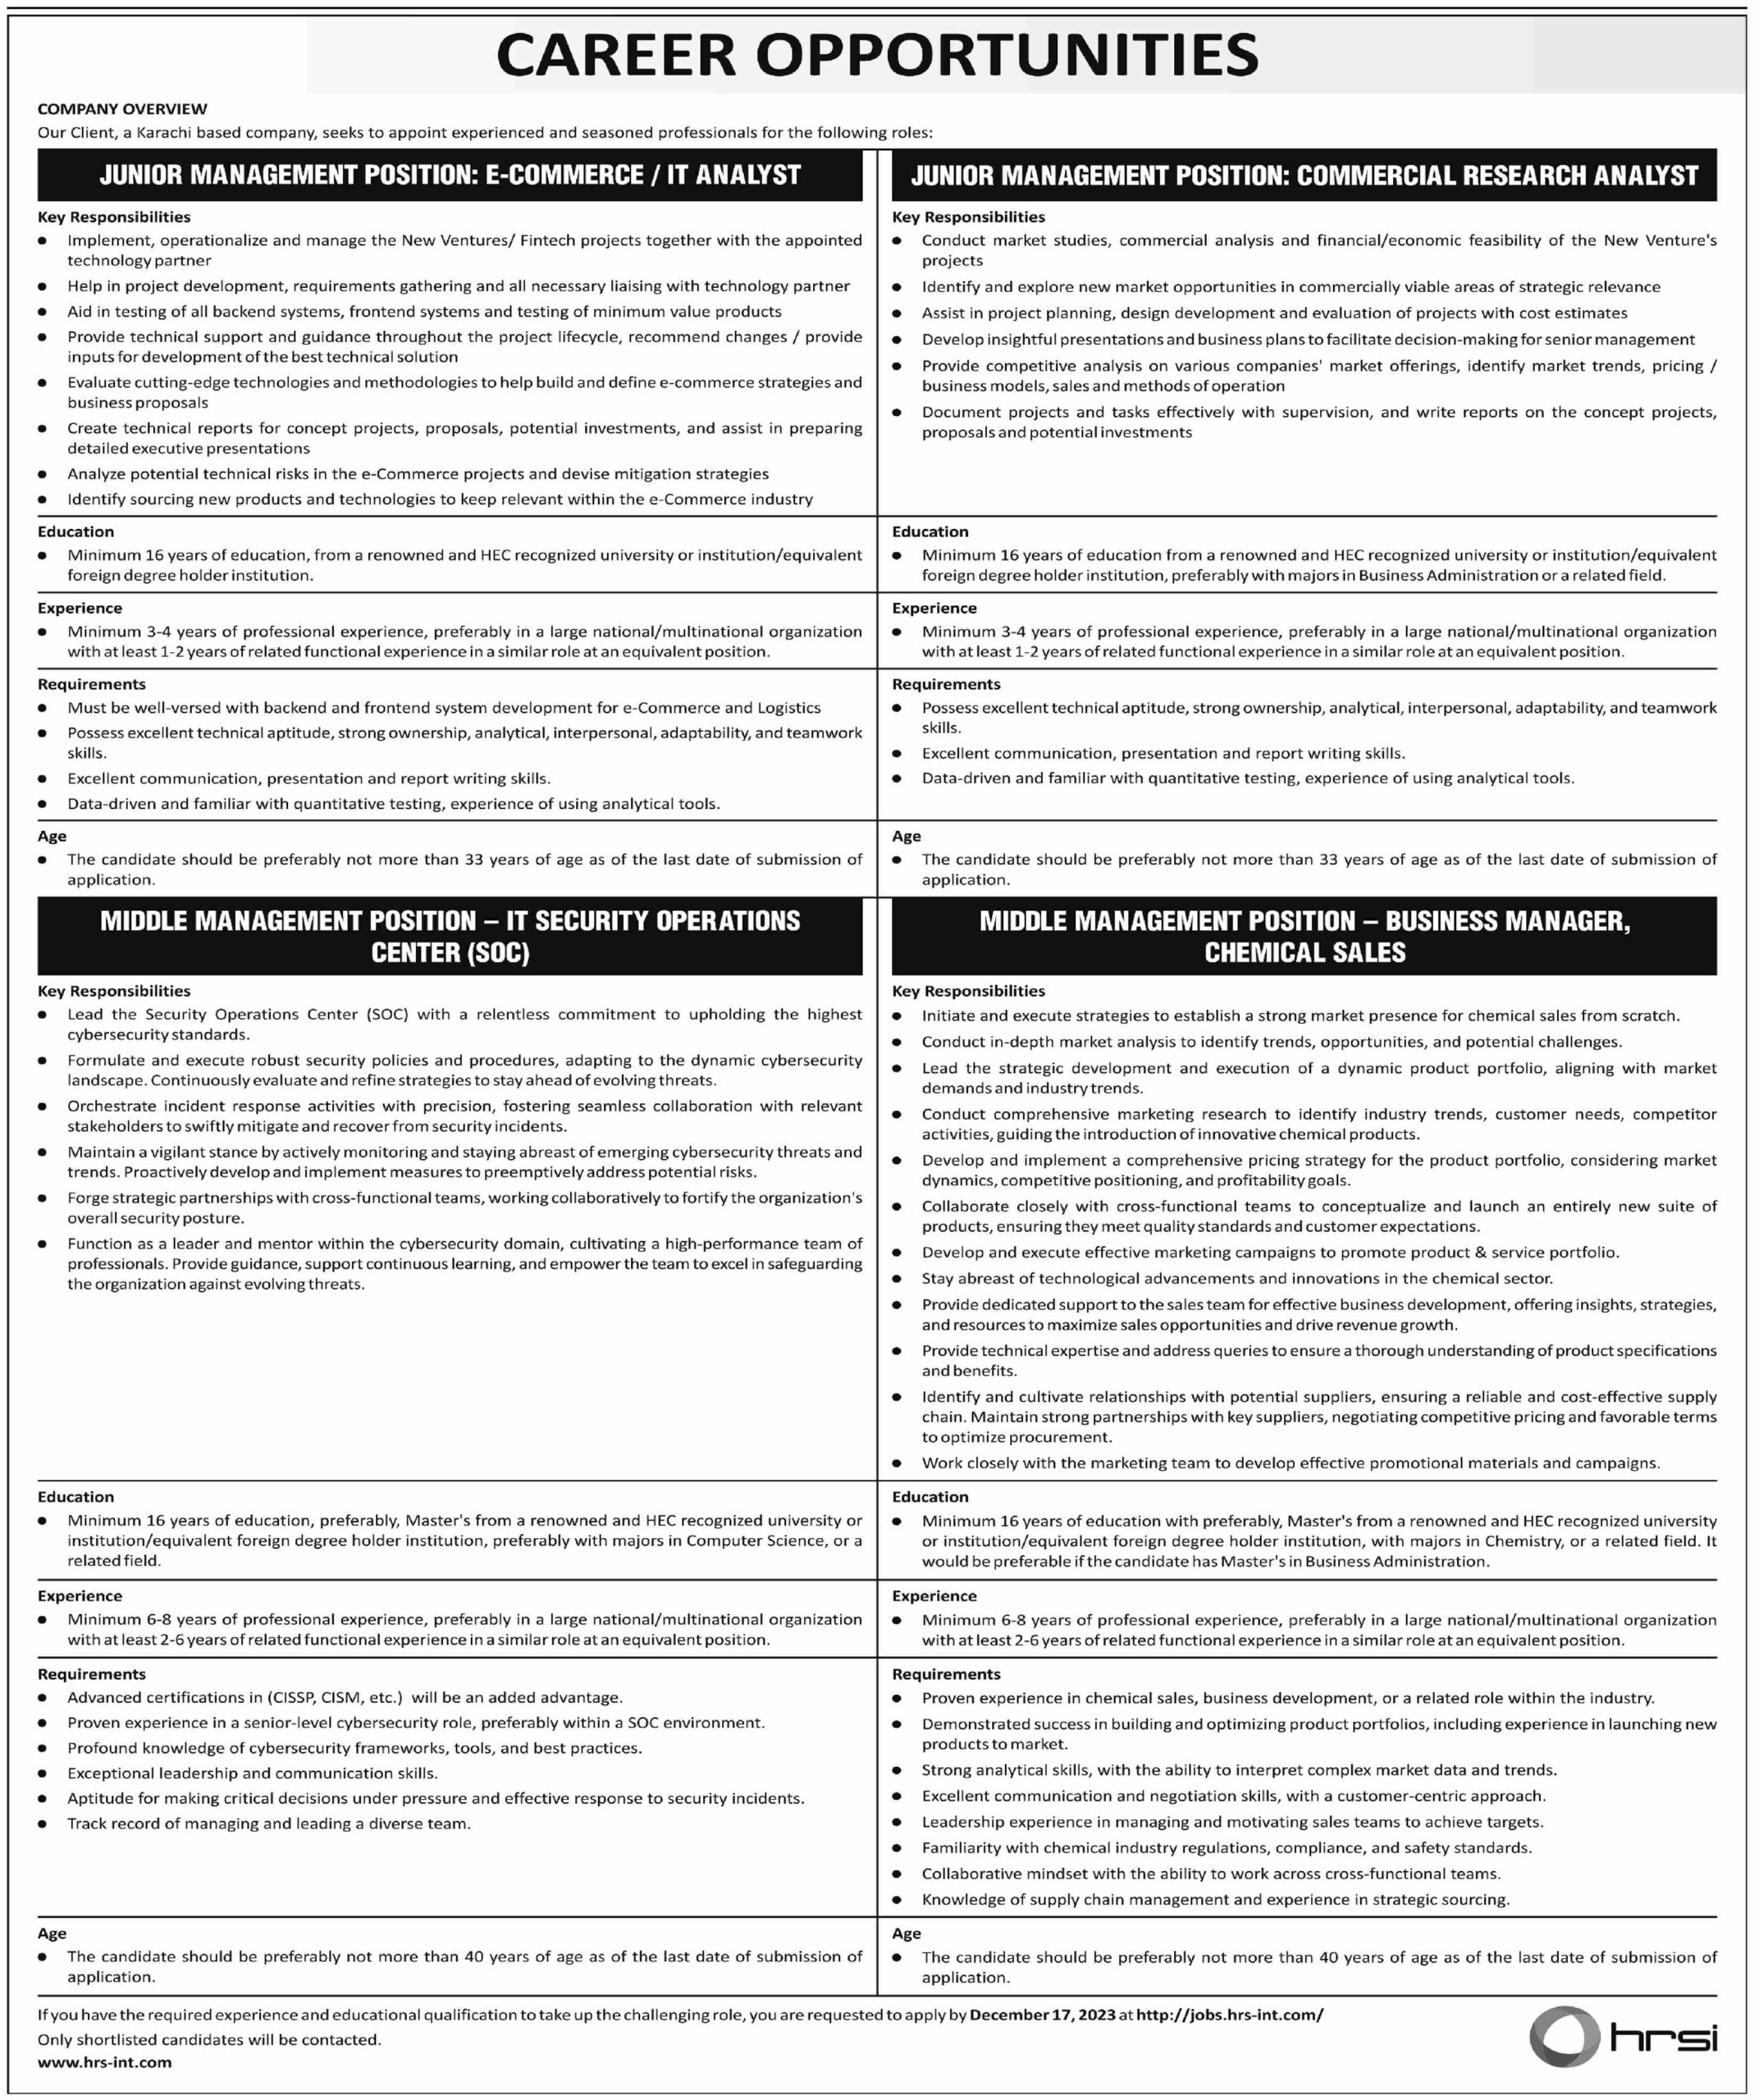 Human Resource Solutions International HRSI Karachi Jobs For IT Analyst & IT Security Operations